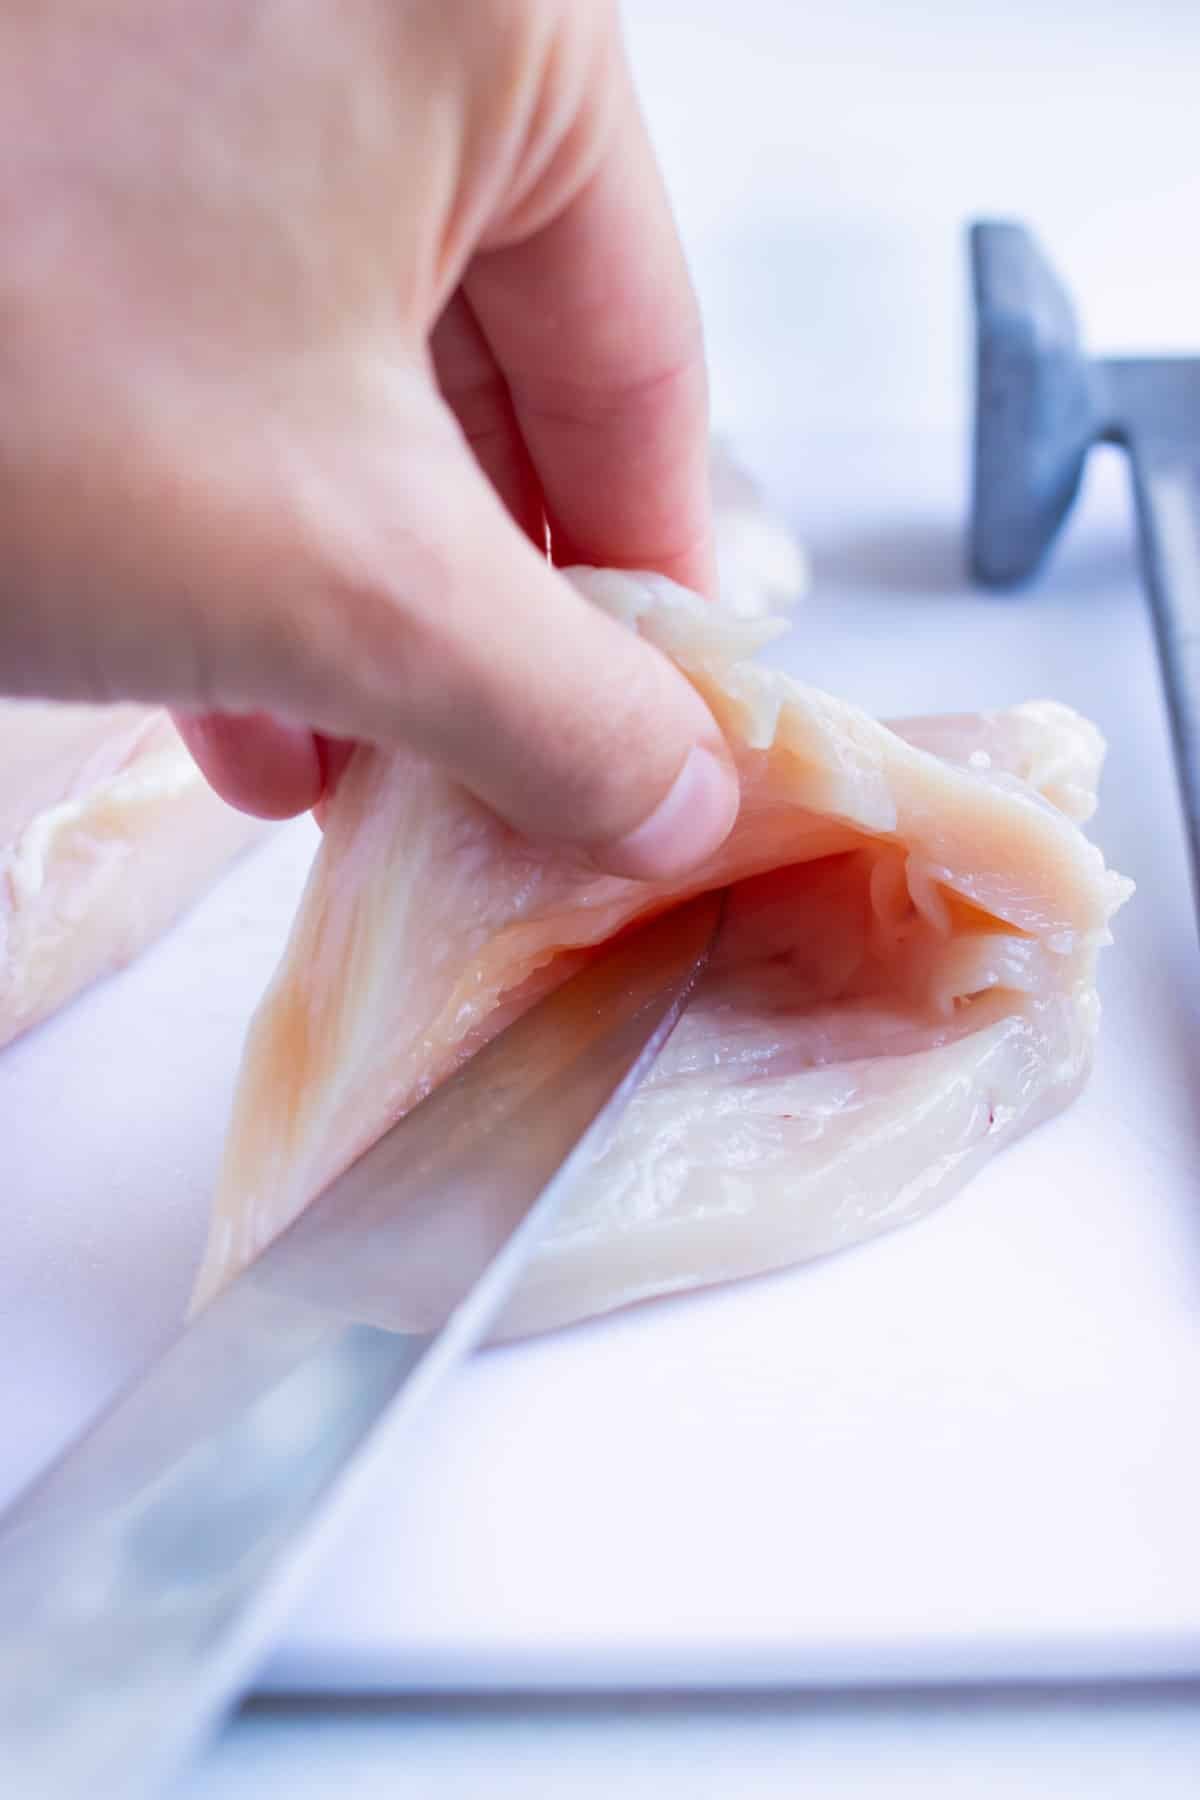 Chicken breasts are cut open before being stuffed with spinach artichoke dip.